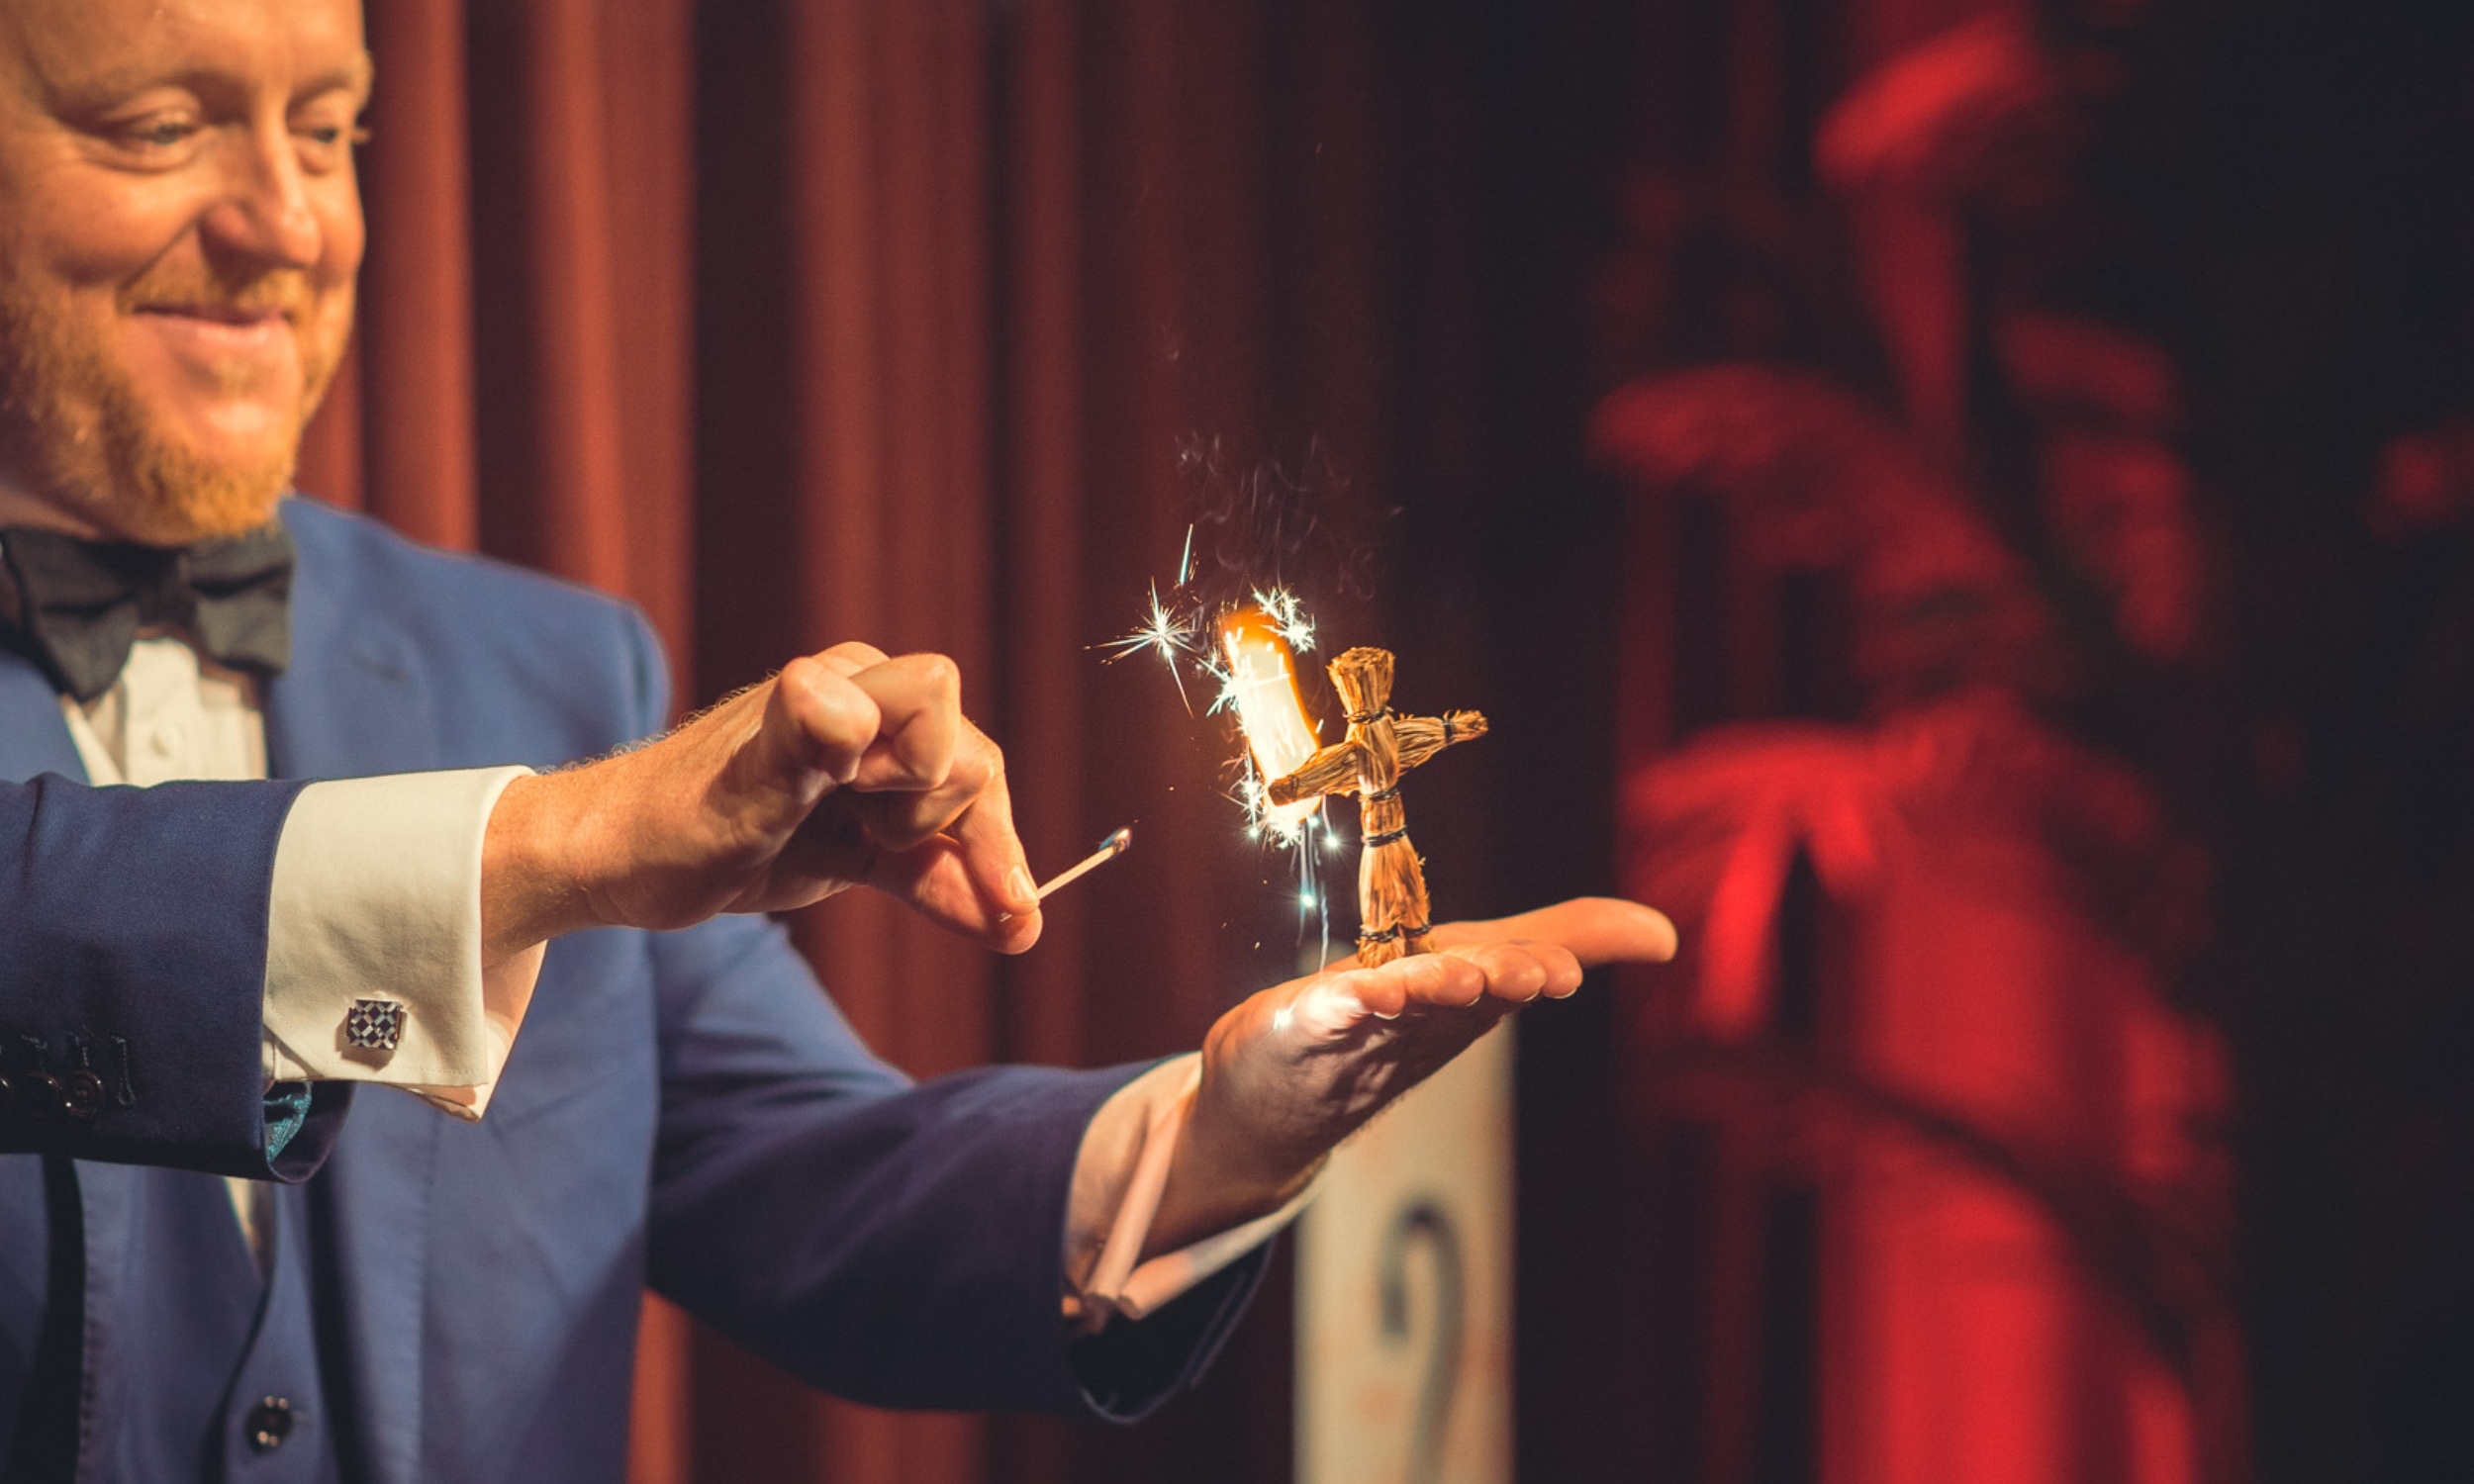 Master Magician Bill Abbott lighting a straw man that is held in his palm